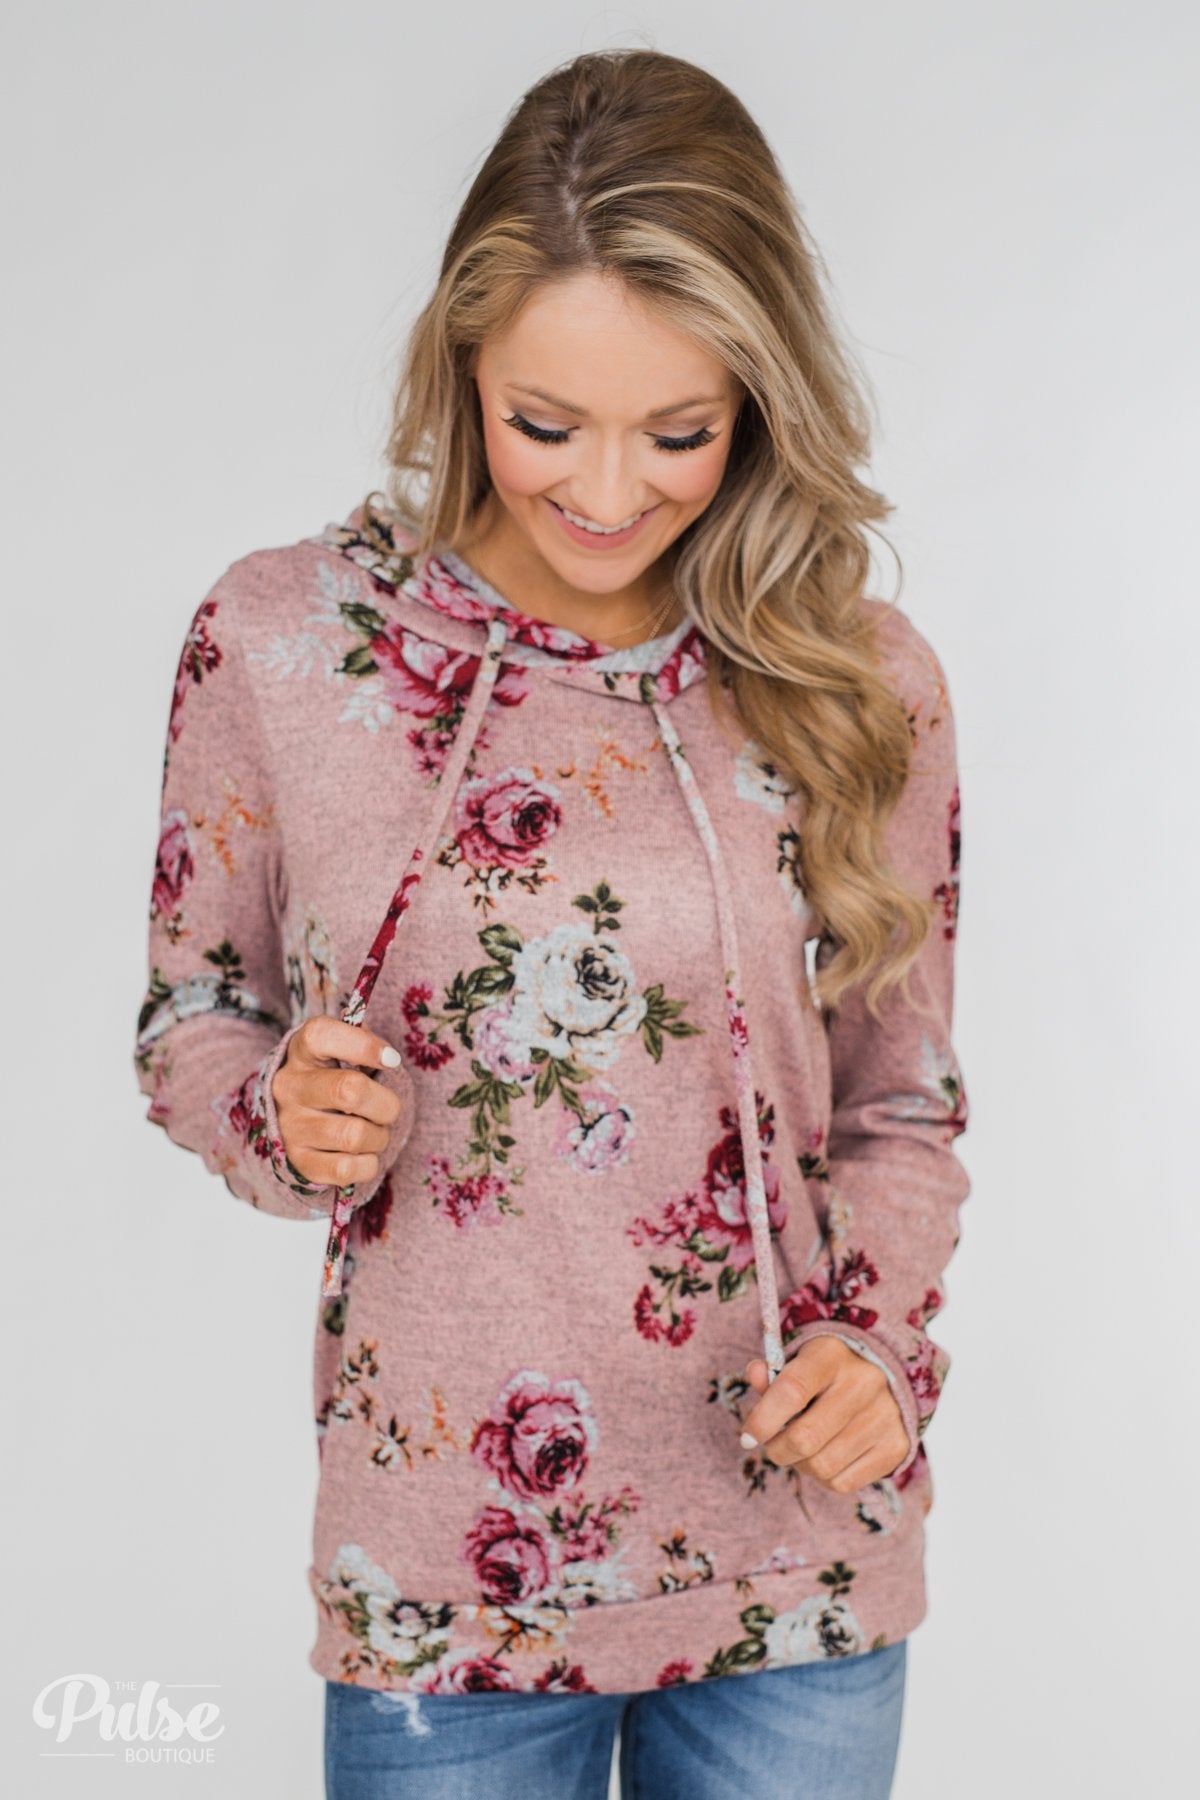 Catching Your Eye Floral Elbow Patch Hoodie- Pink